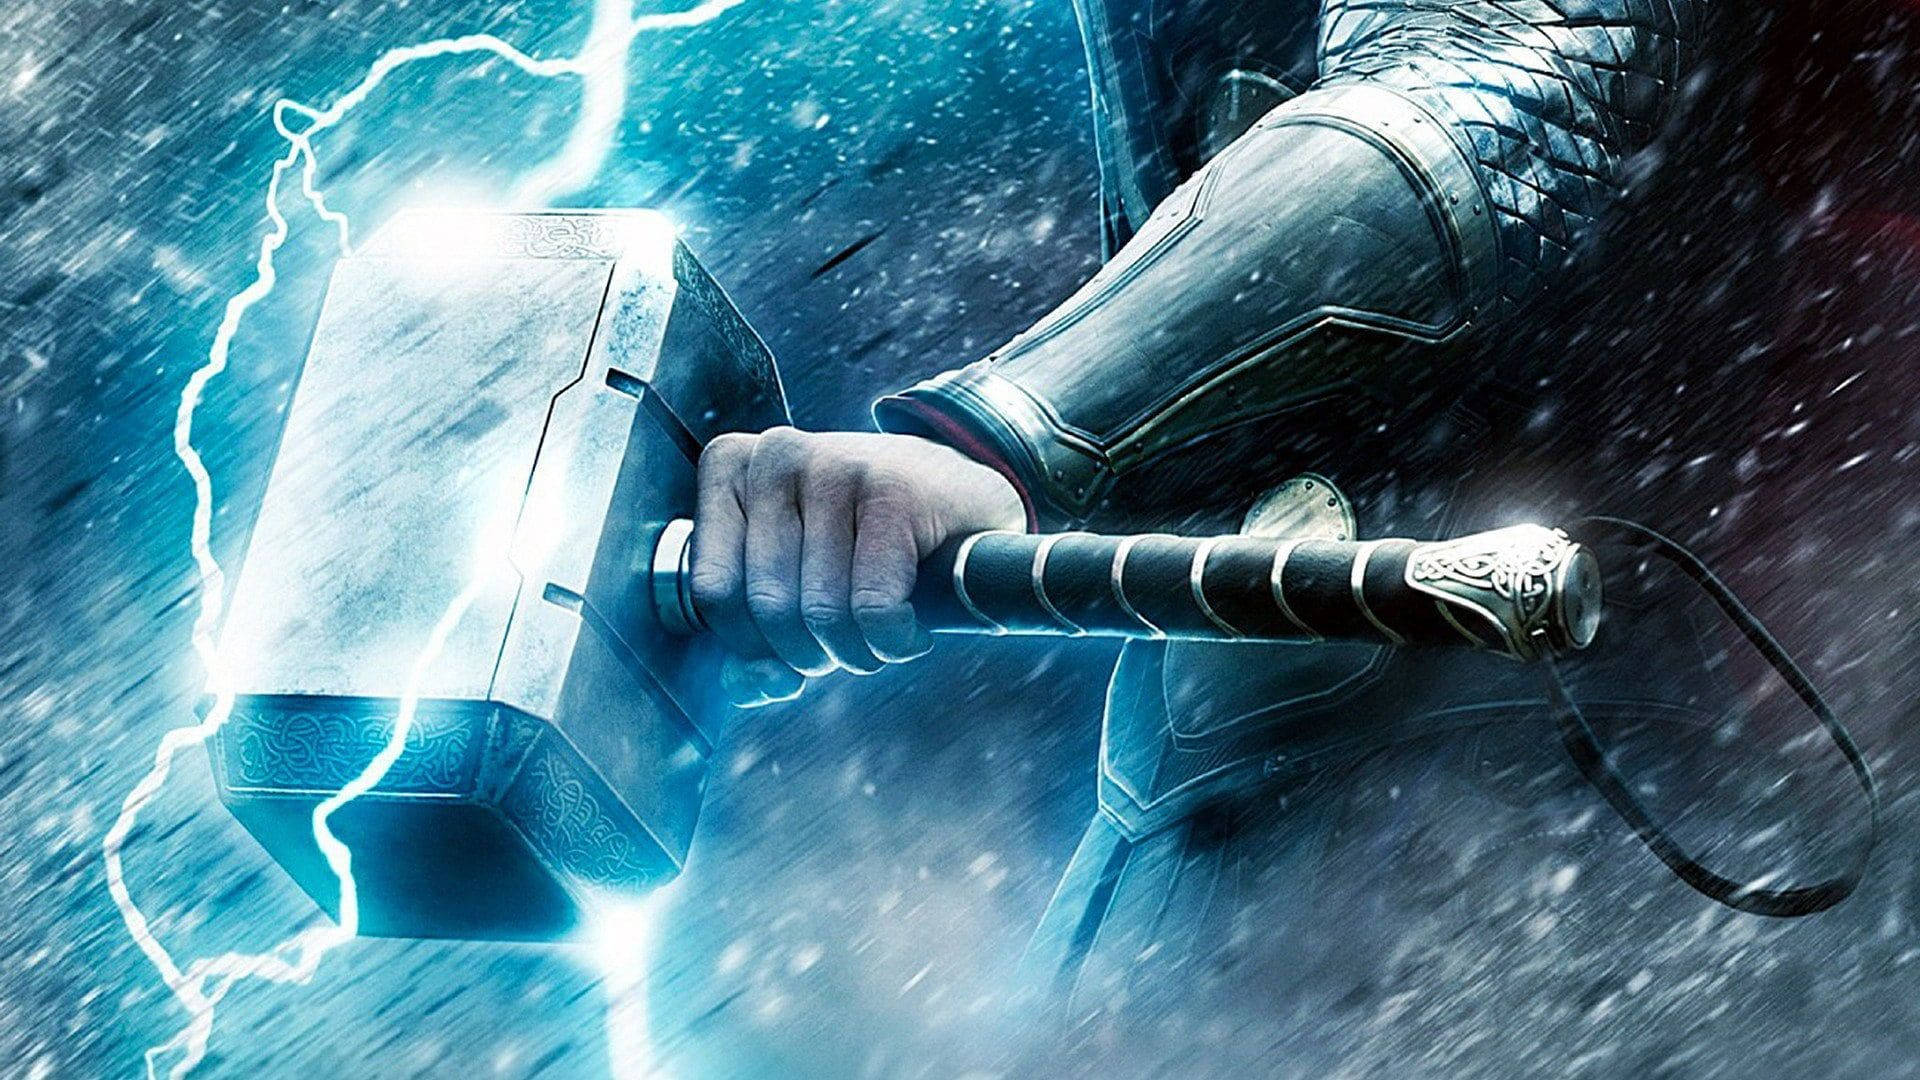 Cool Pictures Thor's Hammer Wallpaper